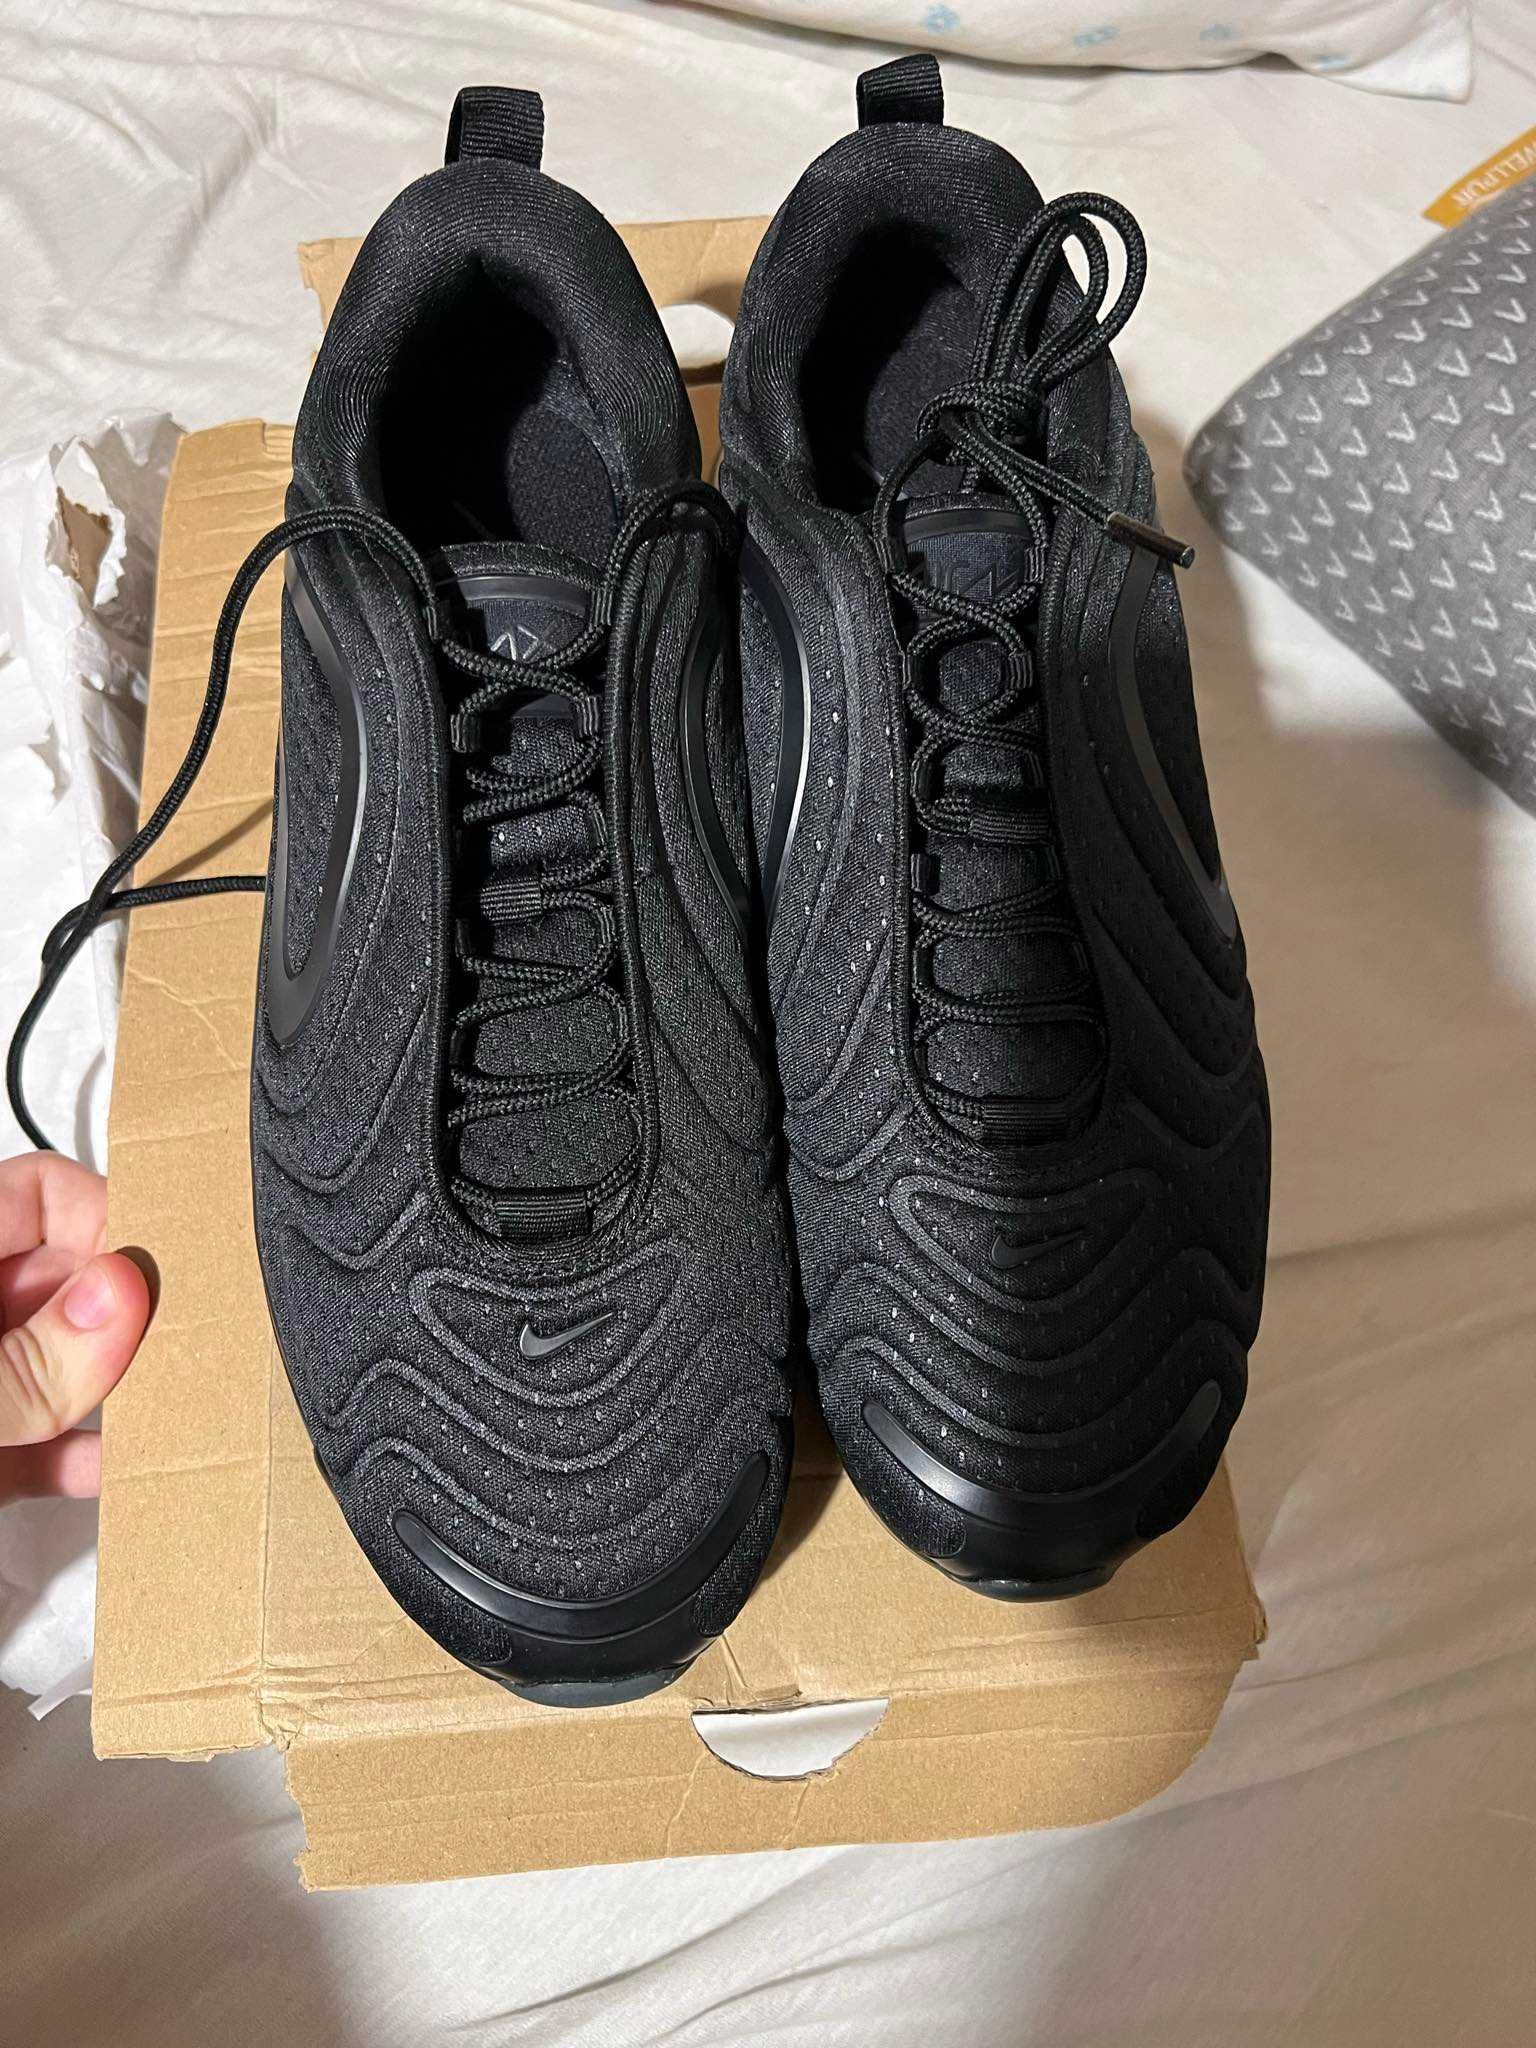 Buty Nike Air Max 720 Black Anthracite 42.5